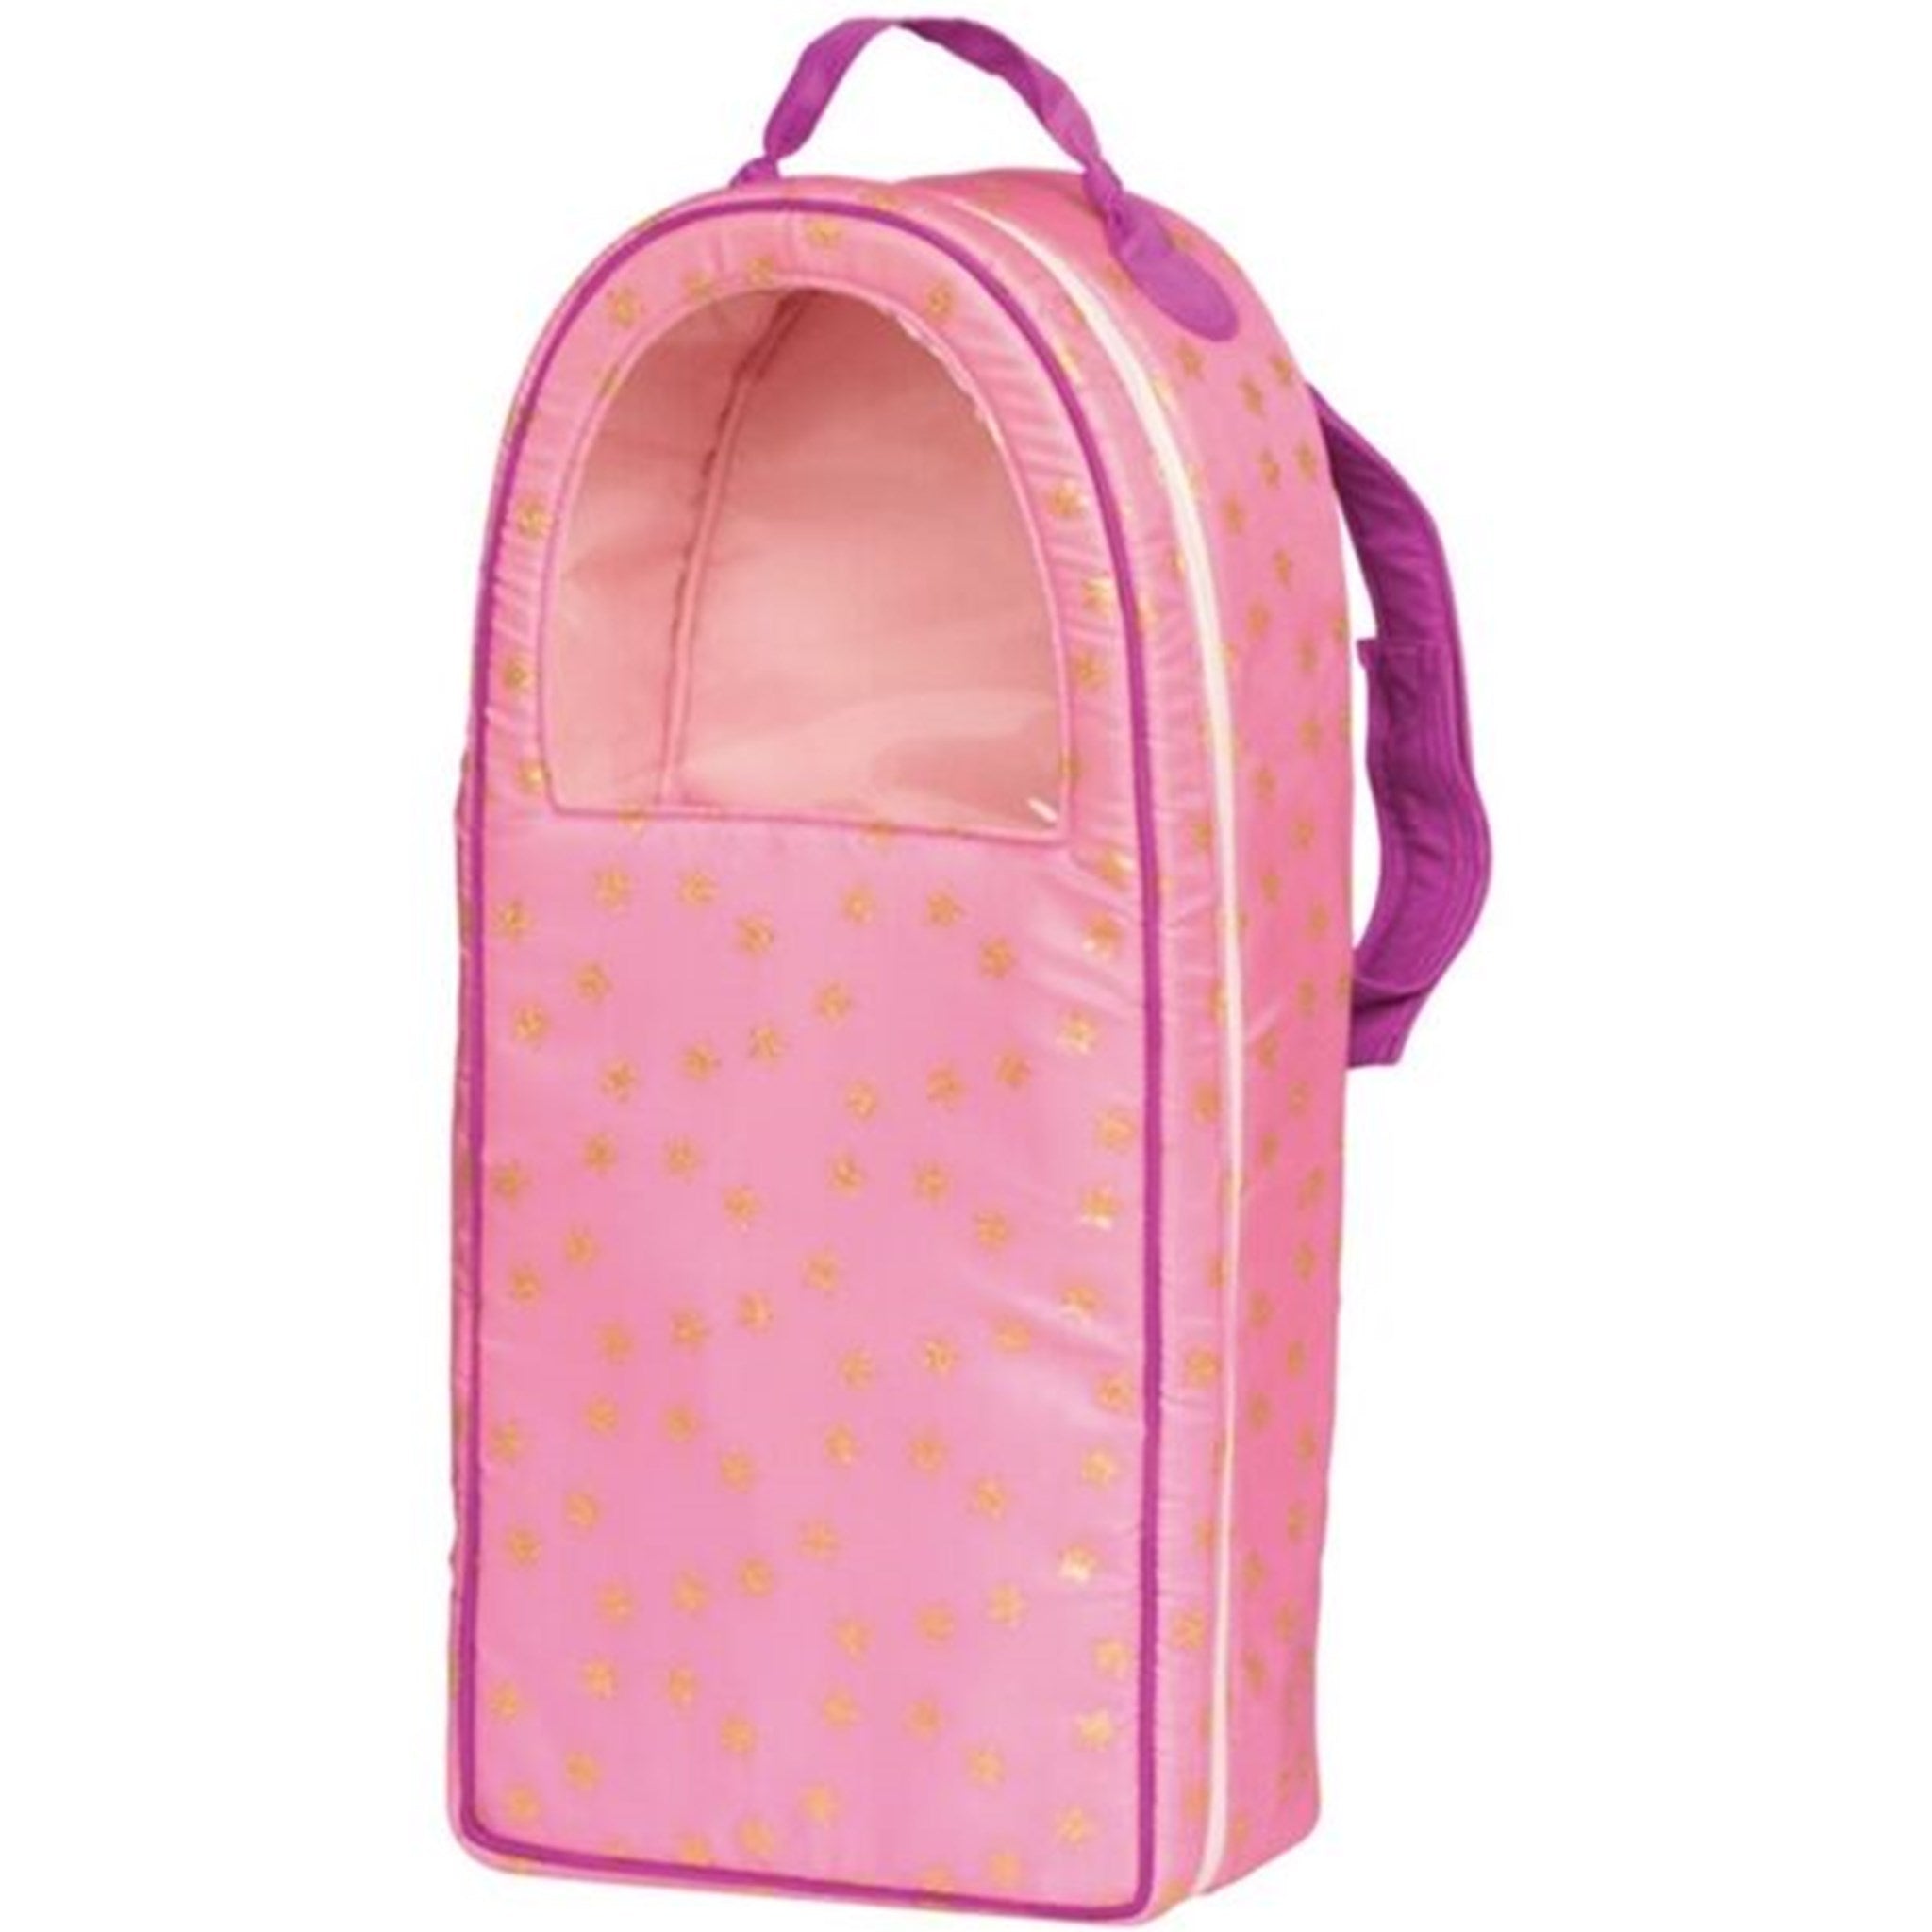 Our Generation Doll Accessories - Carrying Case